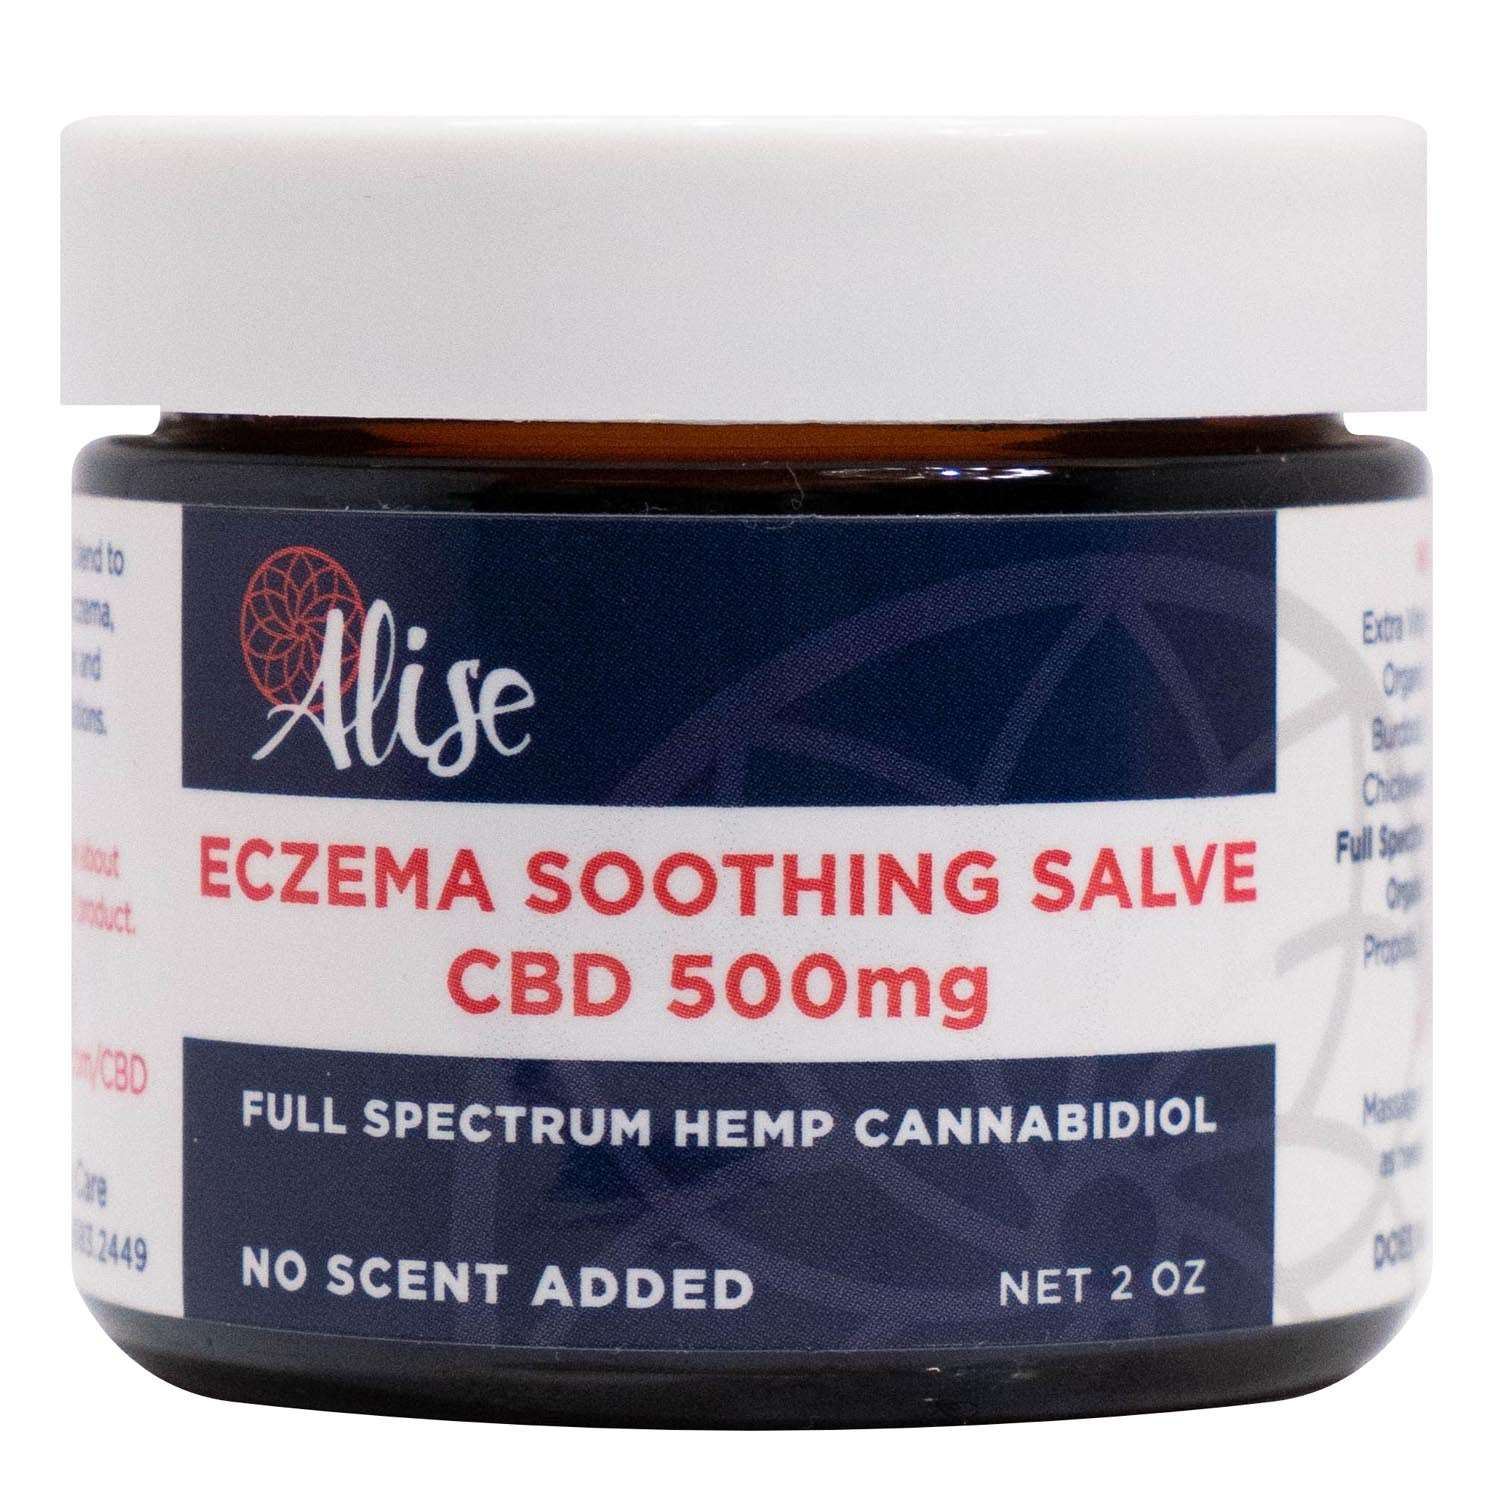 Eczema Soothing Salve CBD 500mg 2oz handcrafted by Alise Body Care